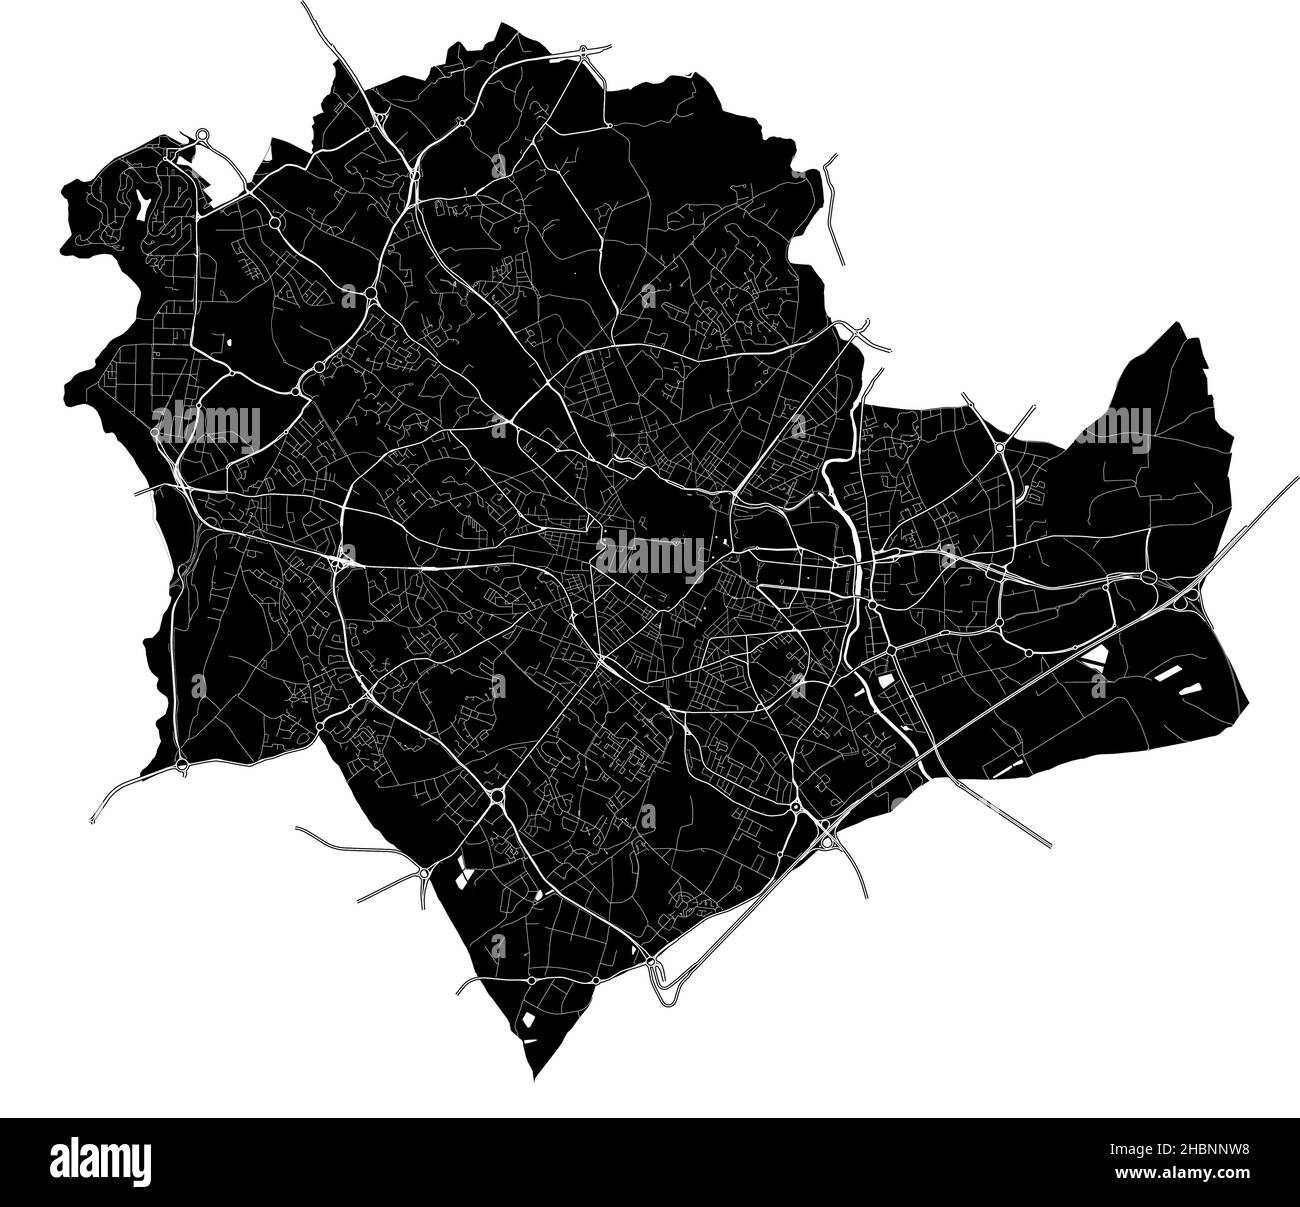 Montpellier, Hérault, France, France, high resolution vector map with city boundaries, and editable paths. The city map was drawn with white areas and Stock Vector